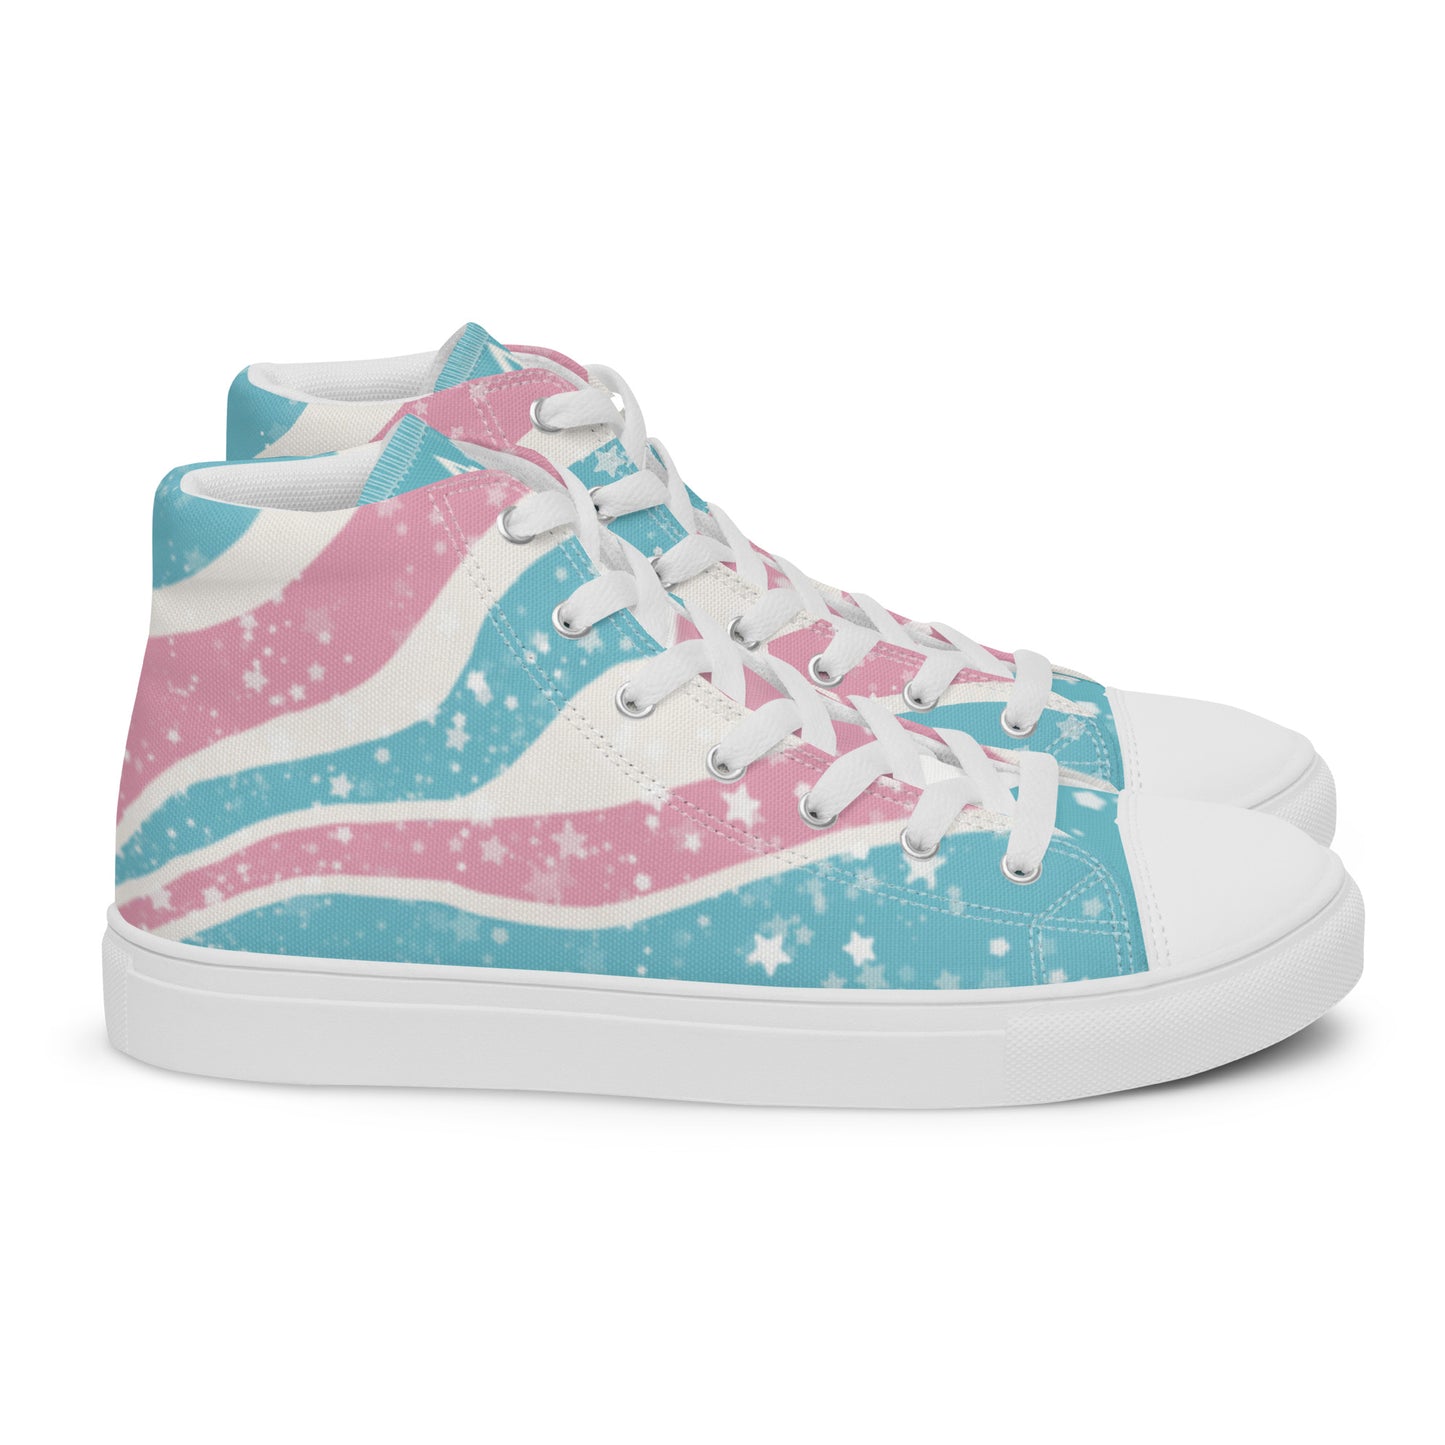 A pair of high top shoes have way lines starting from the heel and getting larger towards the laces in pink, white, and blue with white stars all over, white laces, and white details.